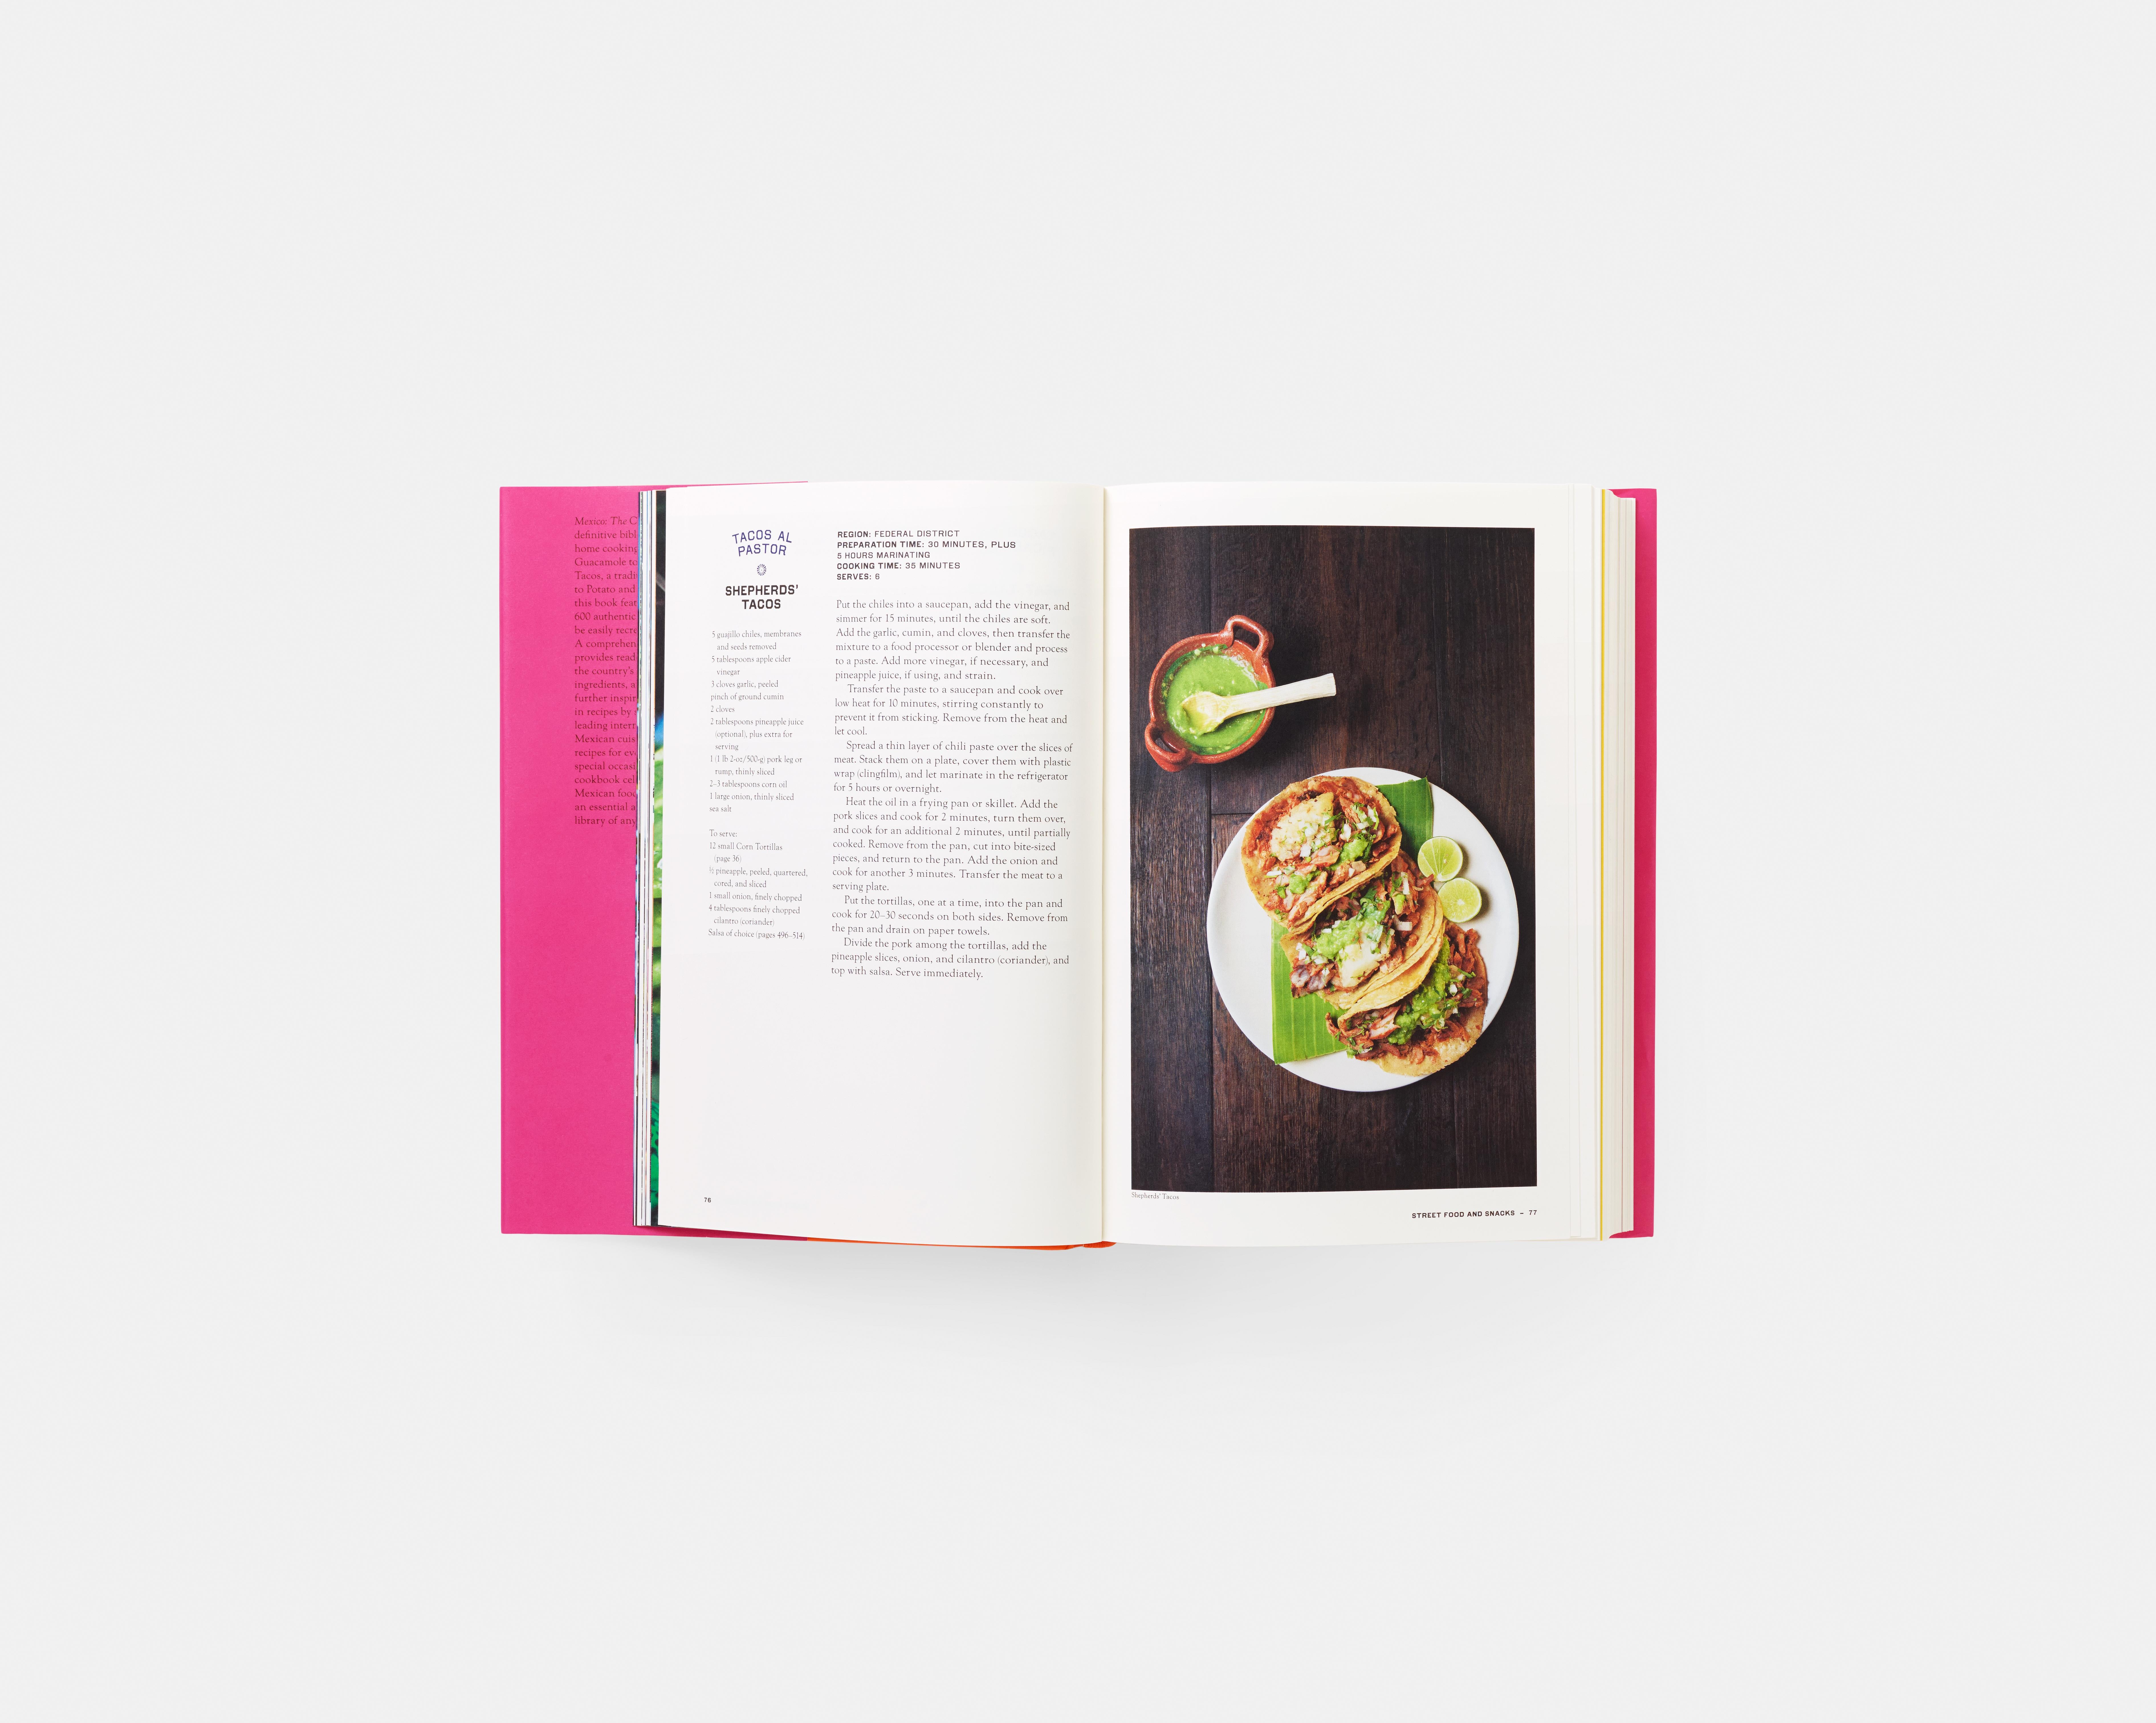 Mexico: The Cookbook is the definitive bible of home-cooking from Mexico. With a culinary history dating back 9,000 years, Mexican food draws influences from Aztec and Mayan Indians and is renowned for its use of fresh aromatic ingredients, colorful